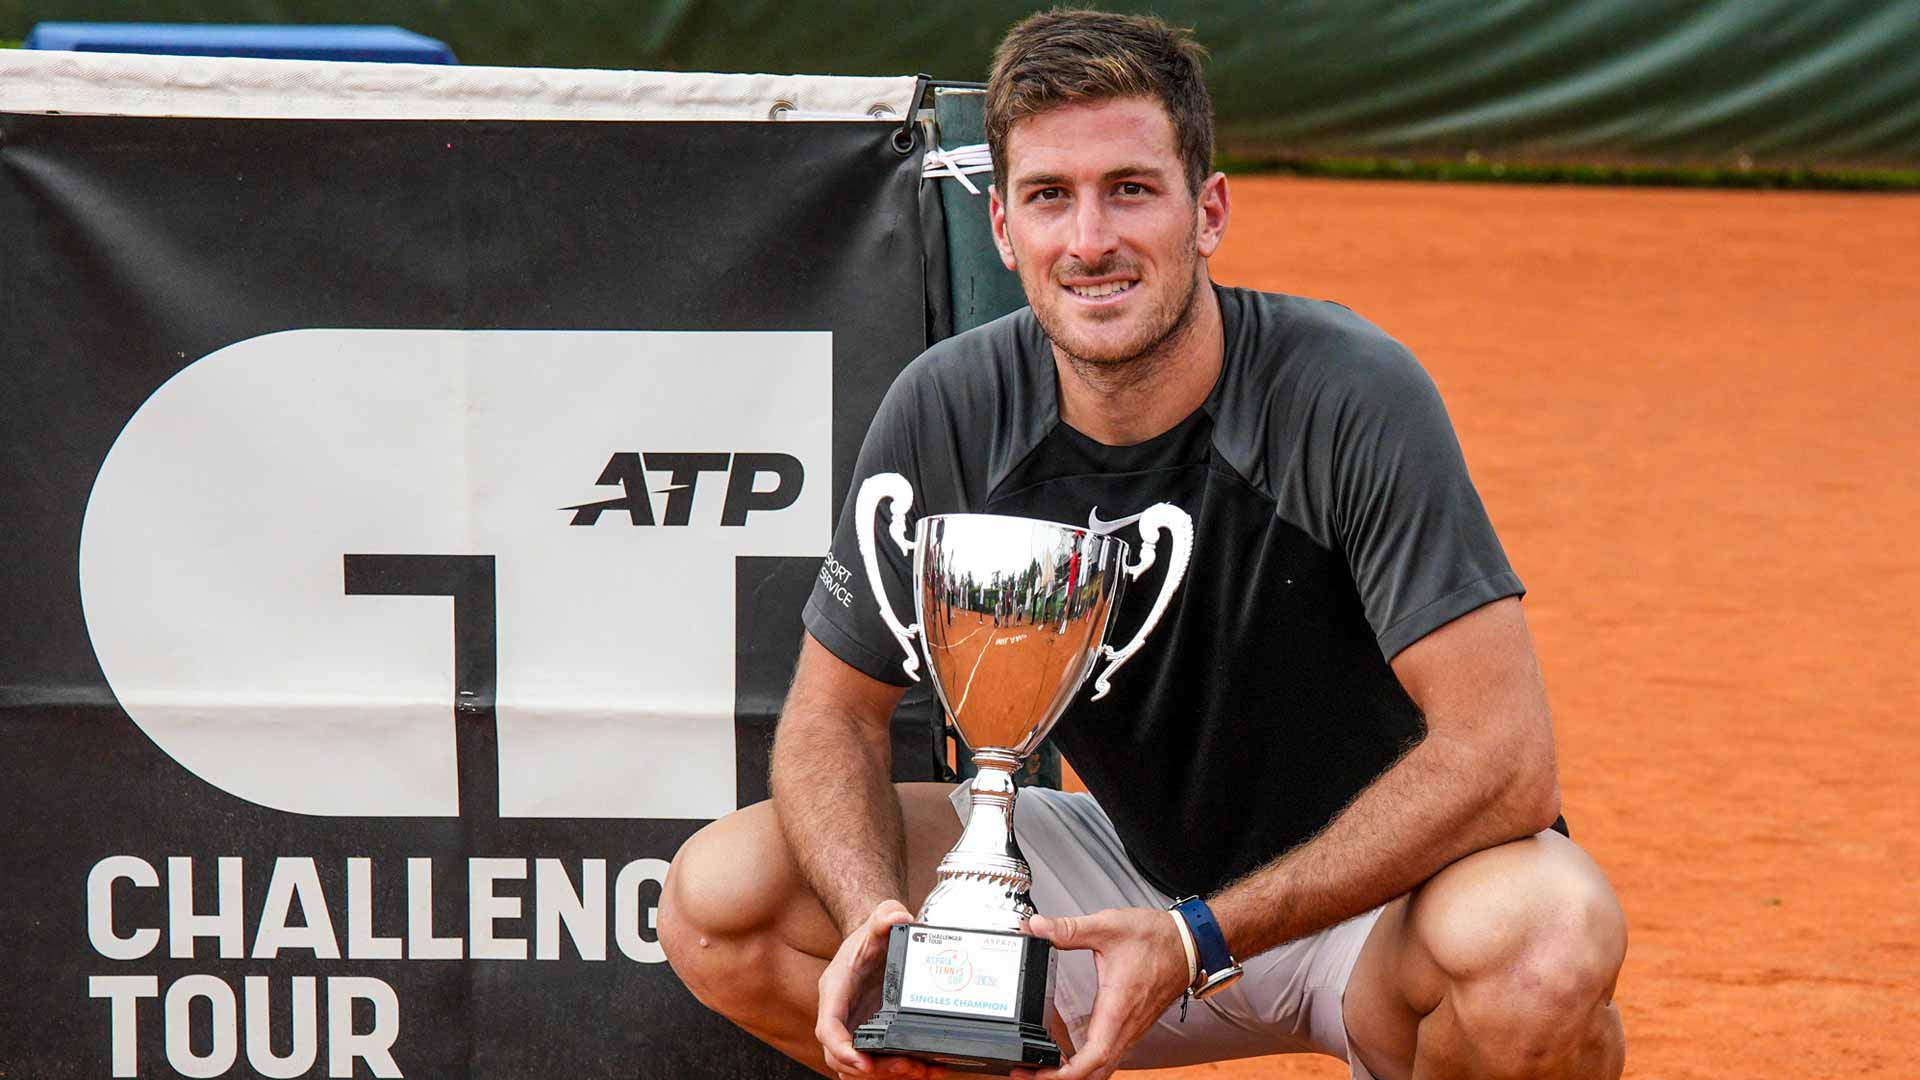 <a href='https://www.atptour.com/en/players/federico-agustin-gomez/gj16/overview'>Federico Agustin Gomez</a> is crowned champion at the Milan Challenger.